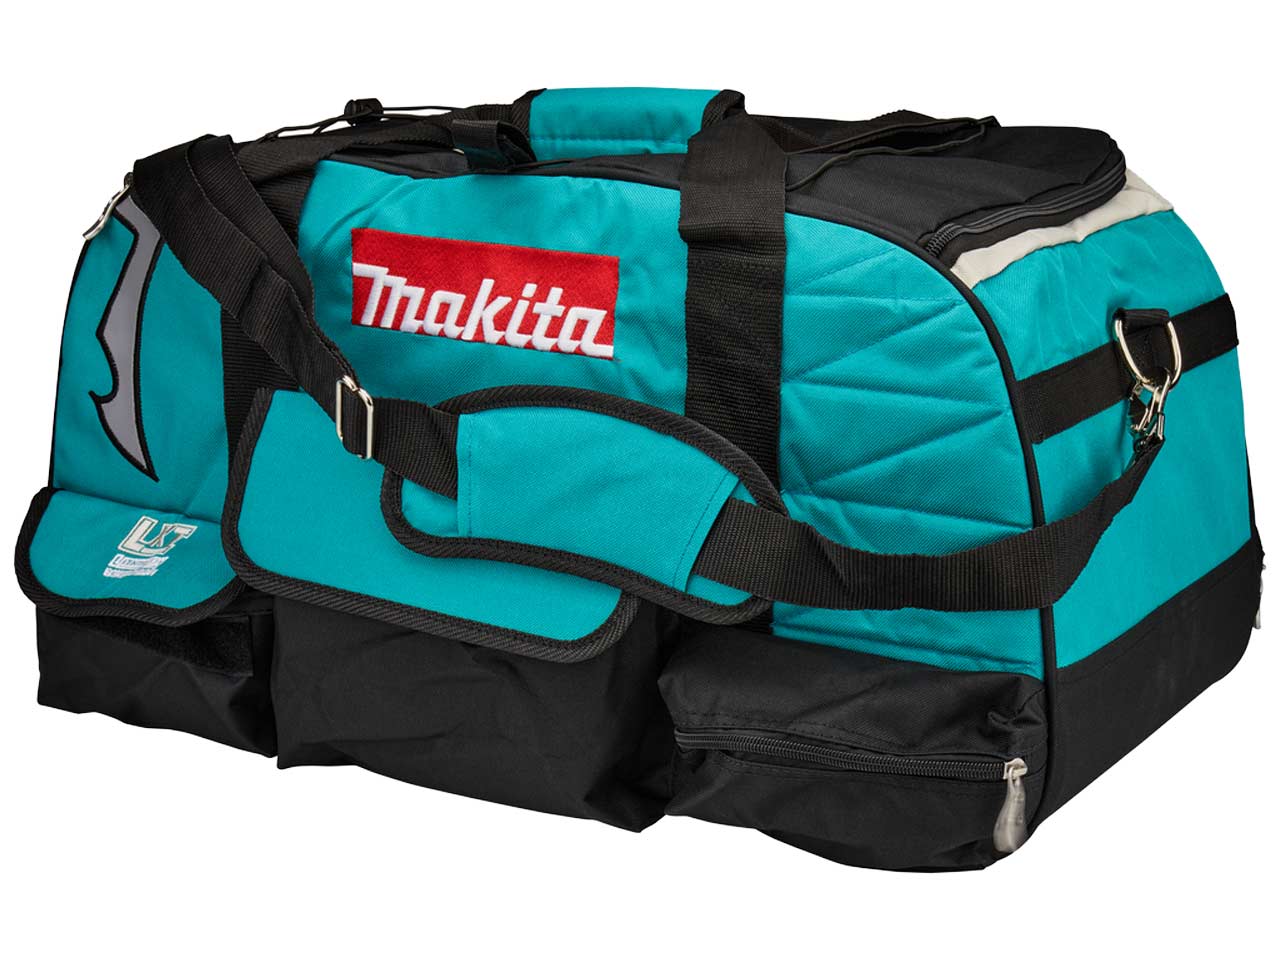 Makita Tool Bag (Unboxing Only) - YouTube